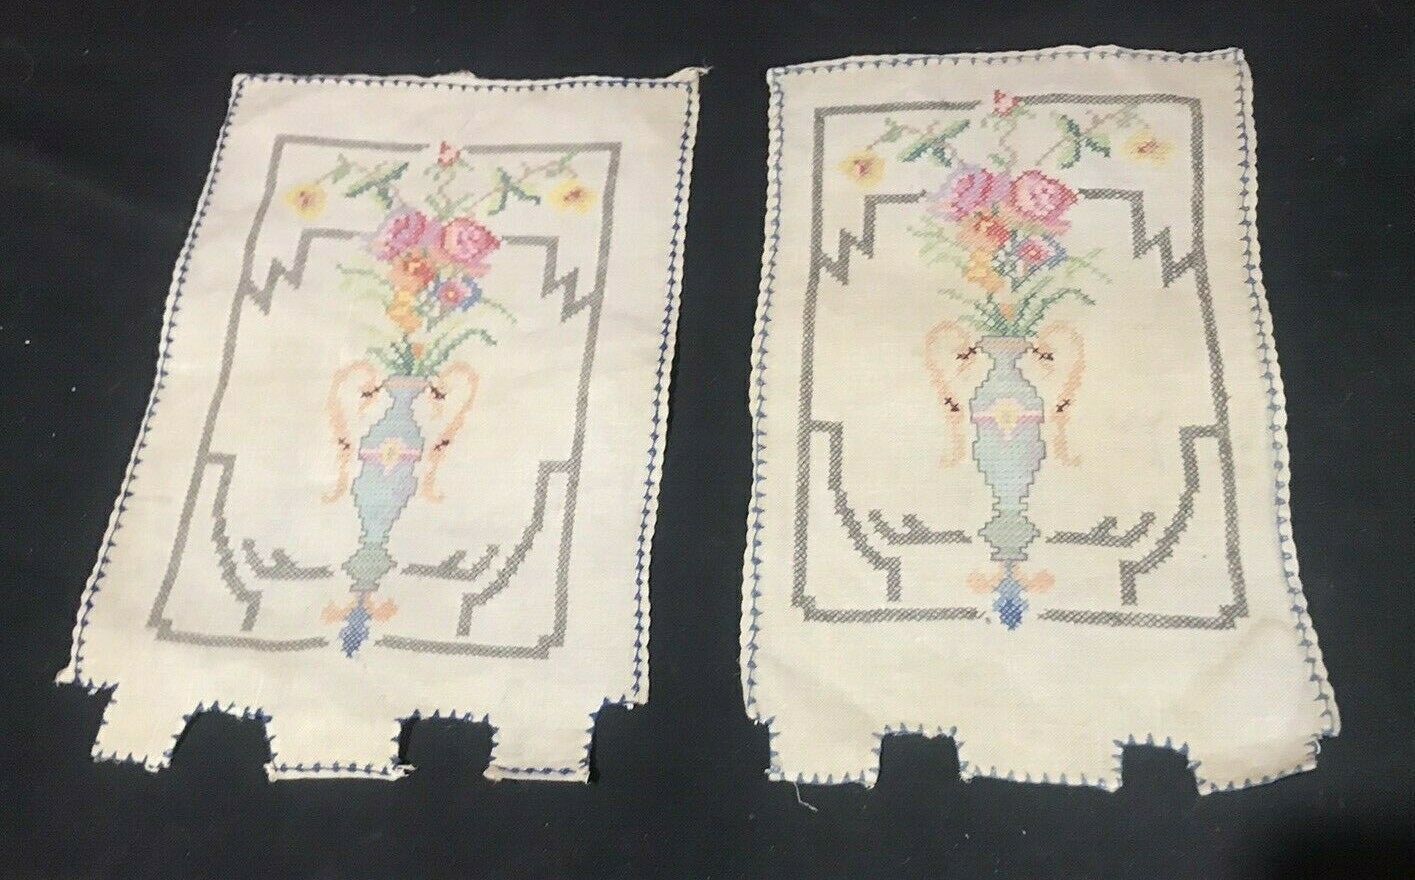 PAIR OF ANTIQUE PETIT POINT NEEDLEWORK CROSS STITCH EMBROIDERY FLORAL PANELS